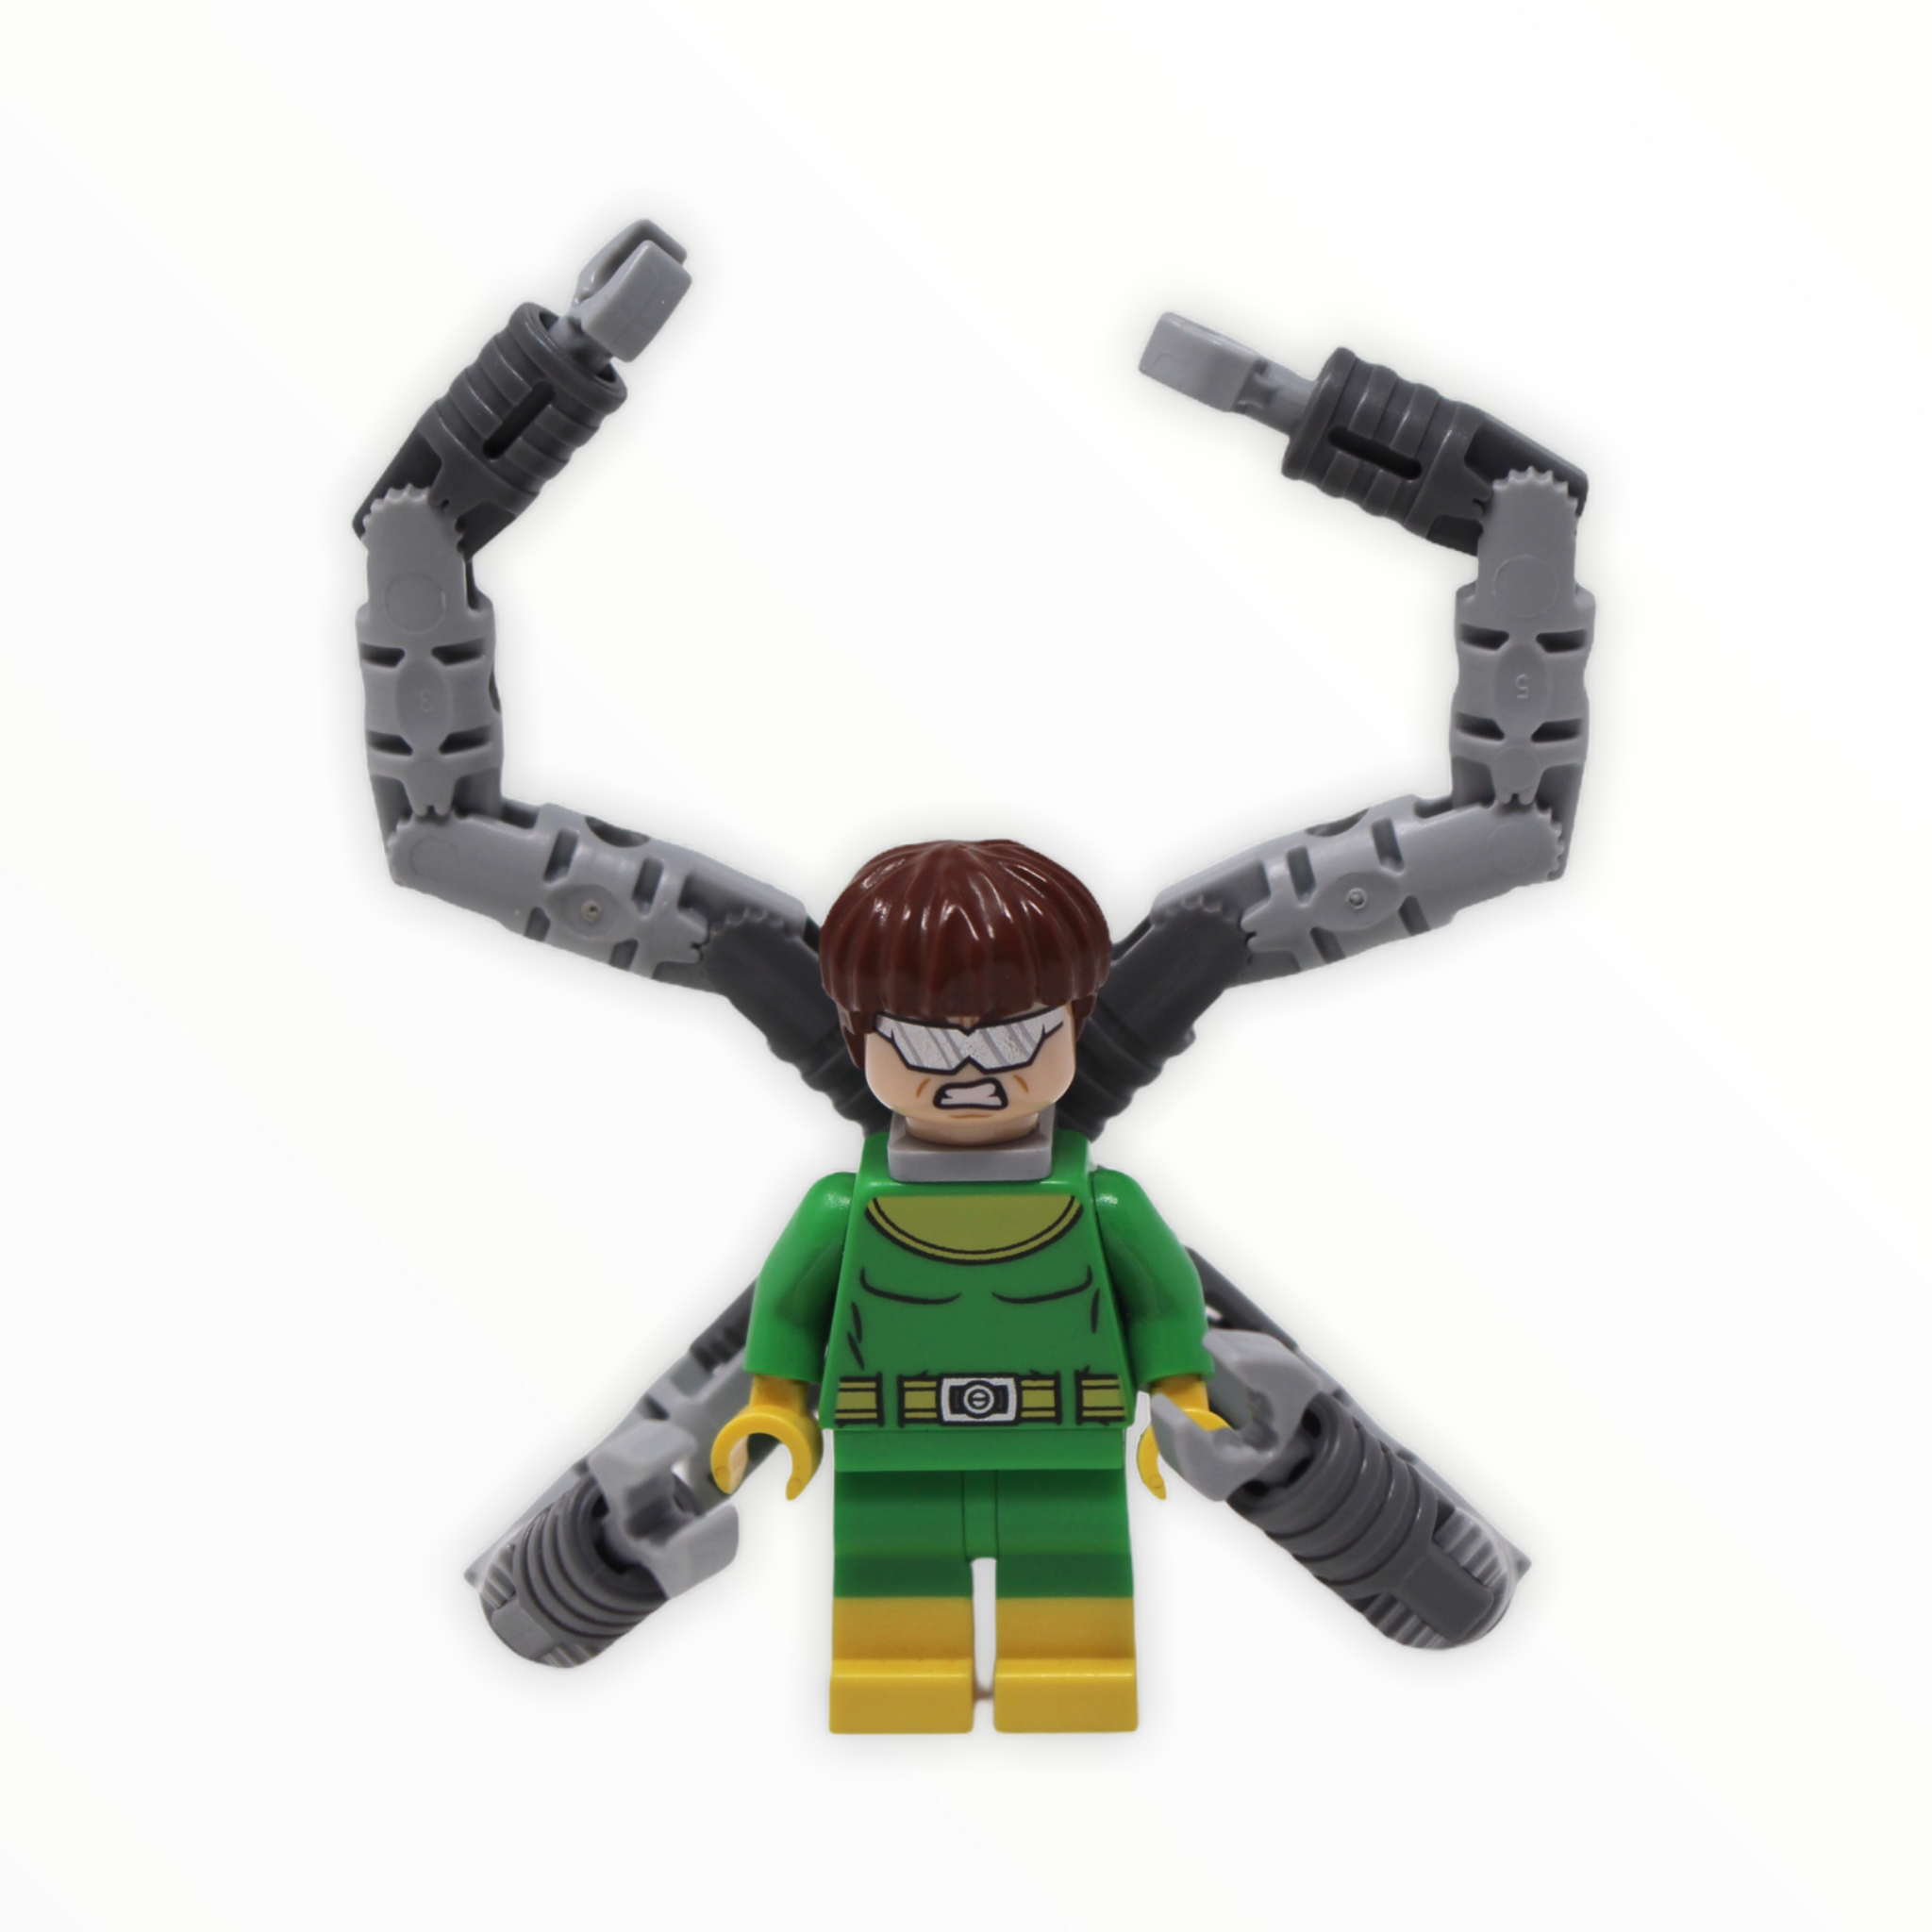 Dr. Octopus/ Doc Ock (bright green and yellow suit, tentacles)